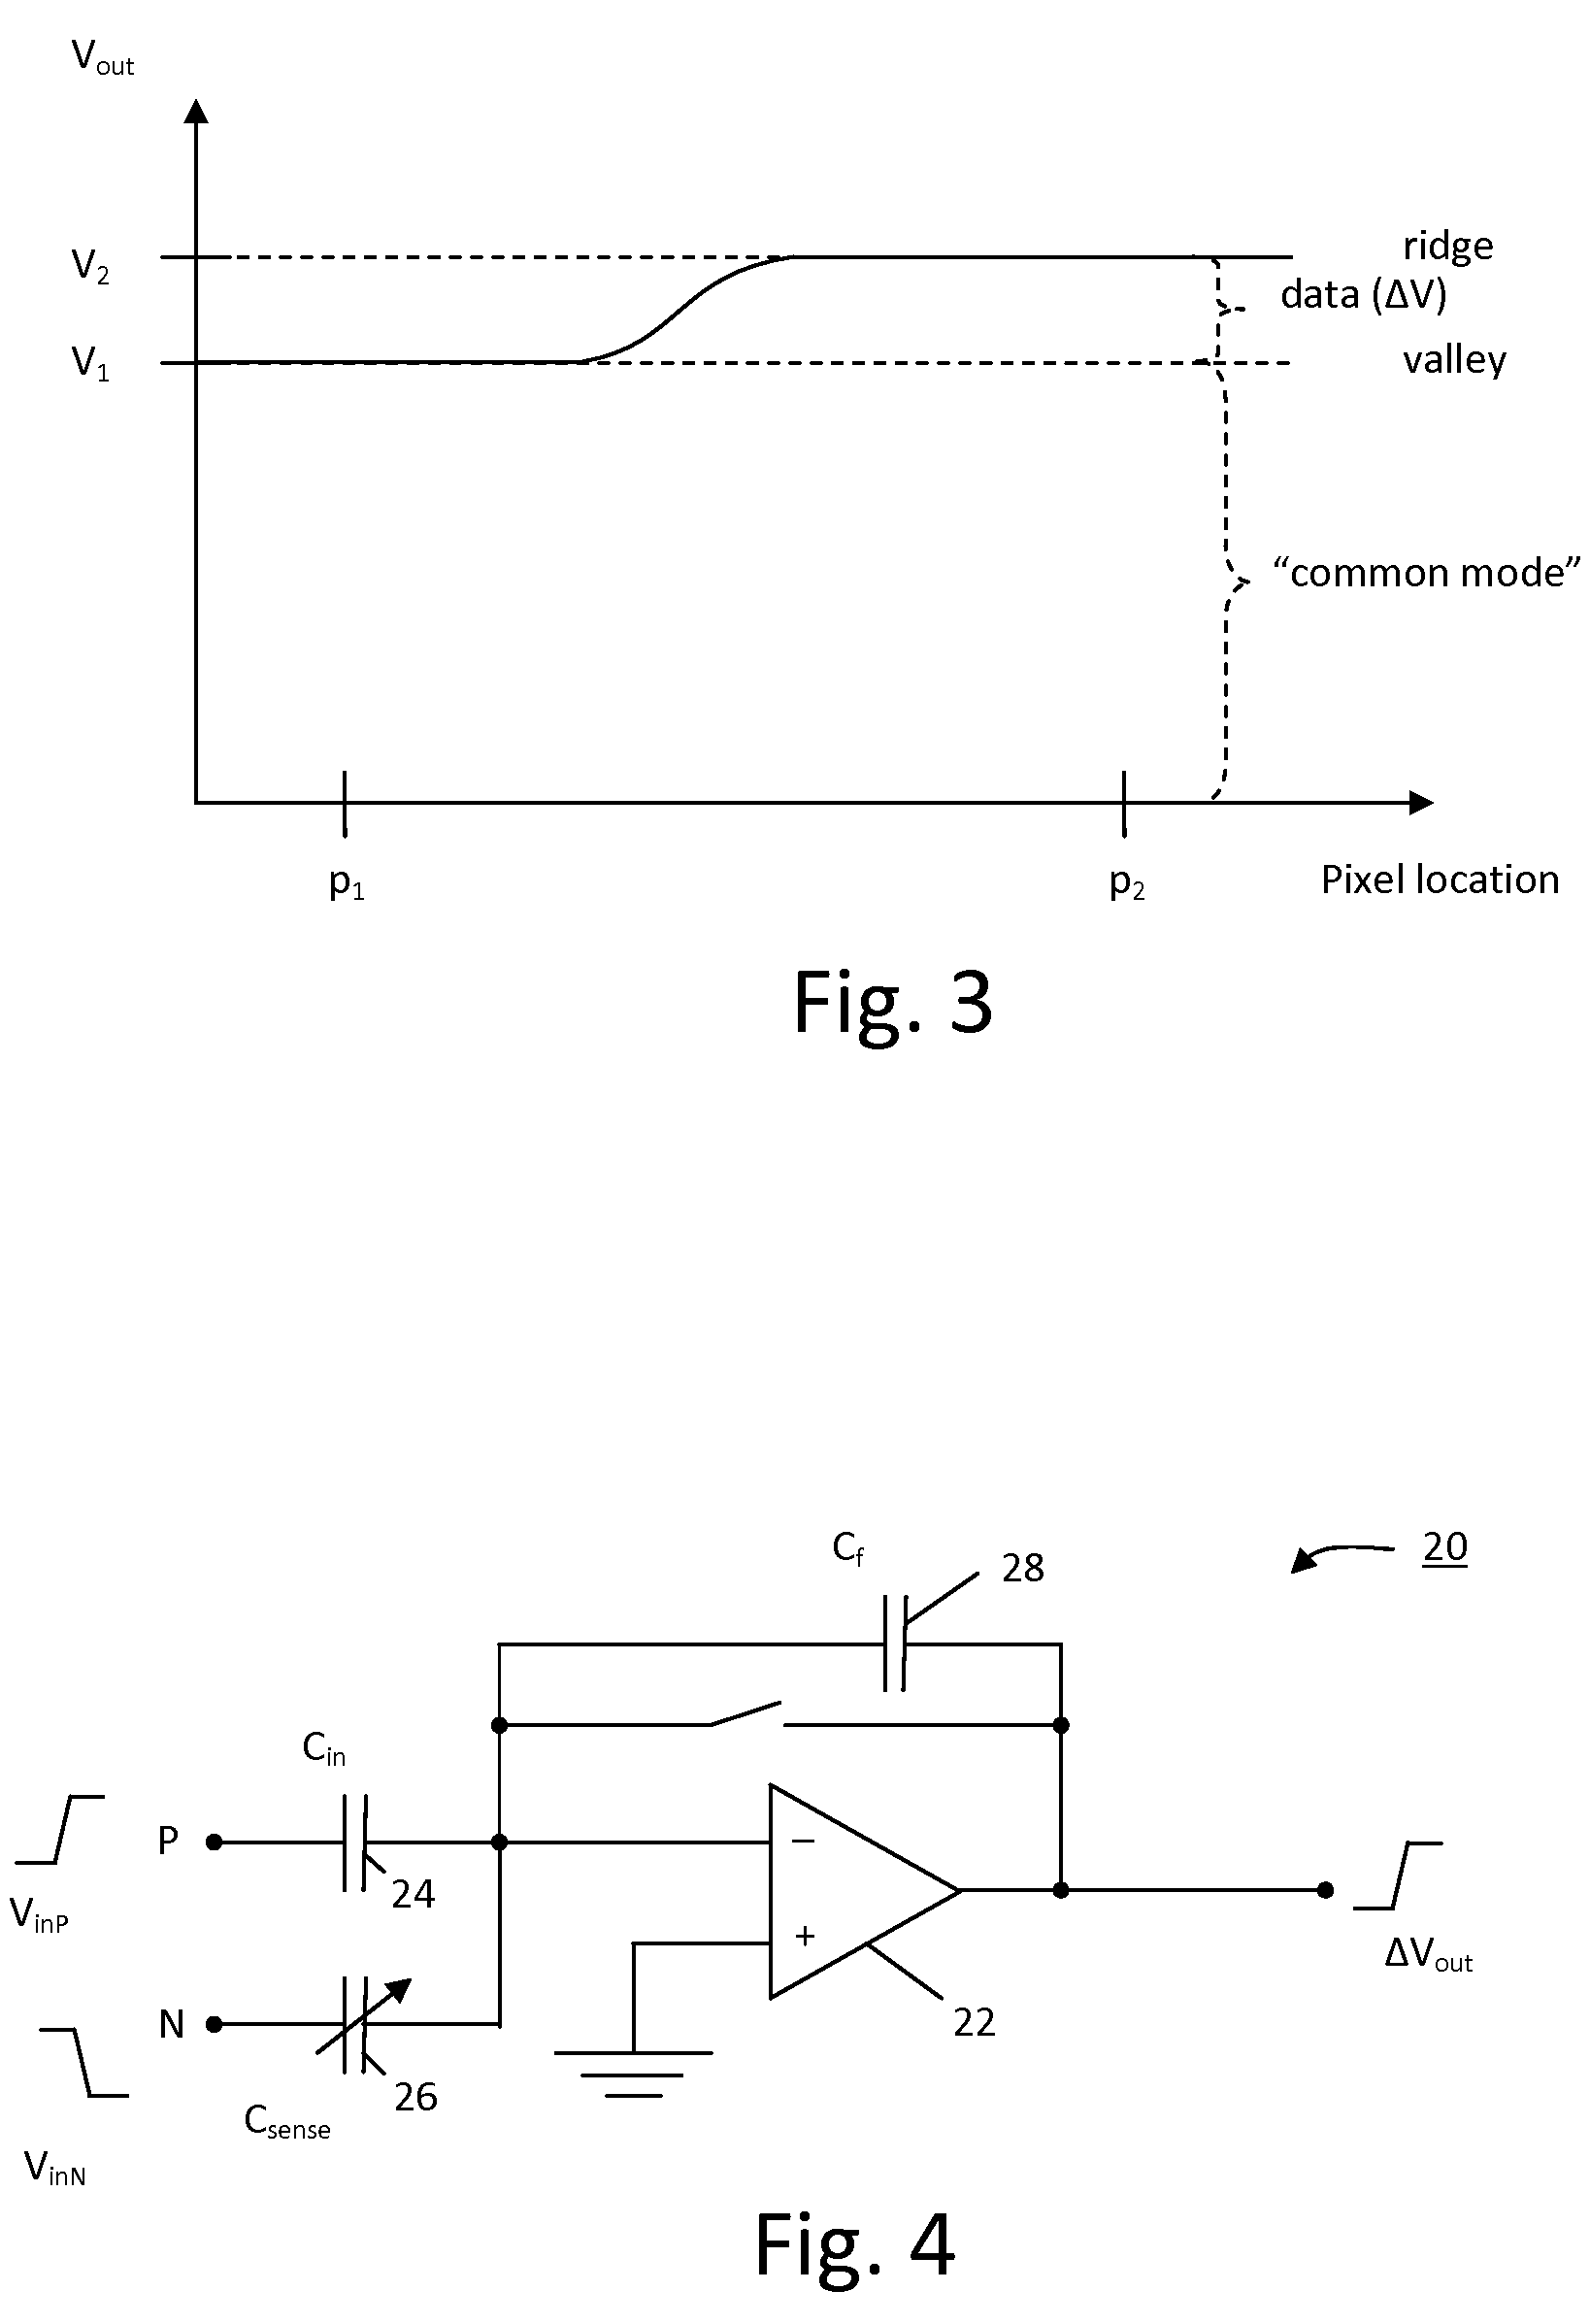 Pixel sensing circuit with common mode cancellation